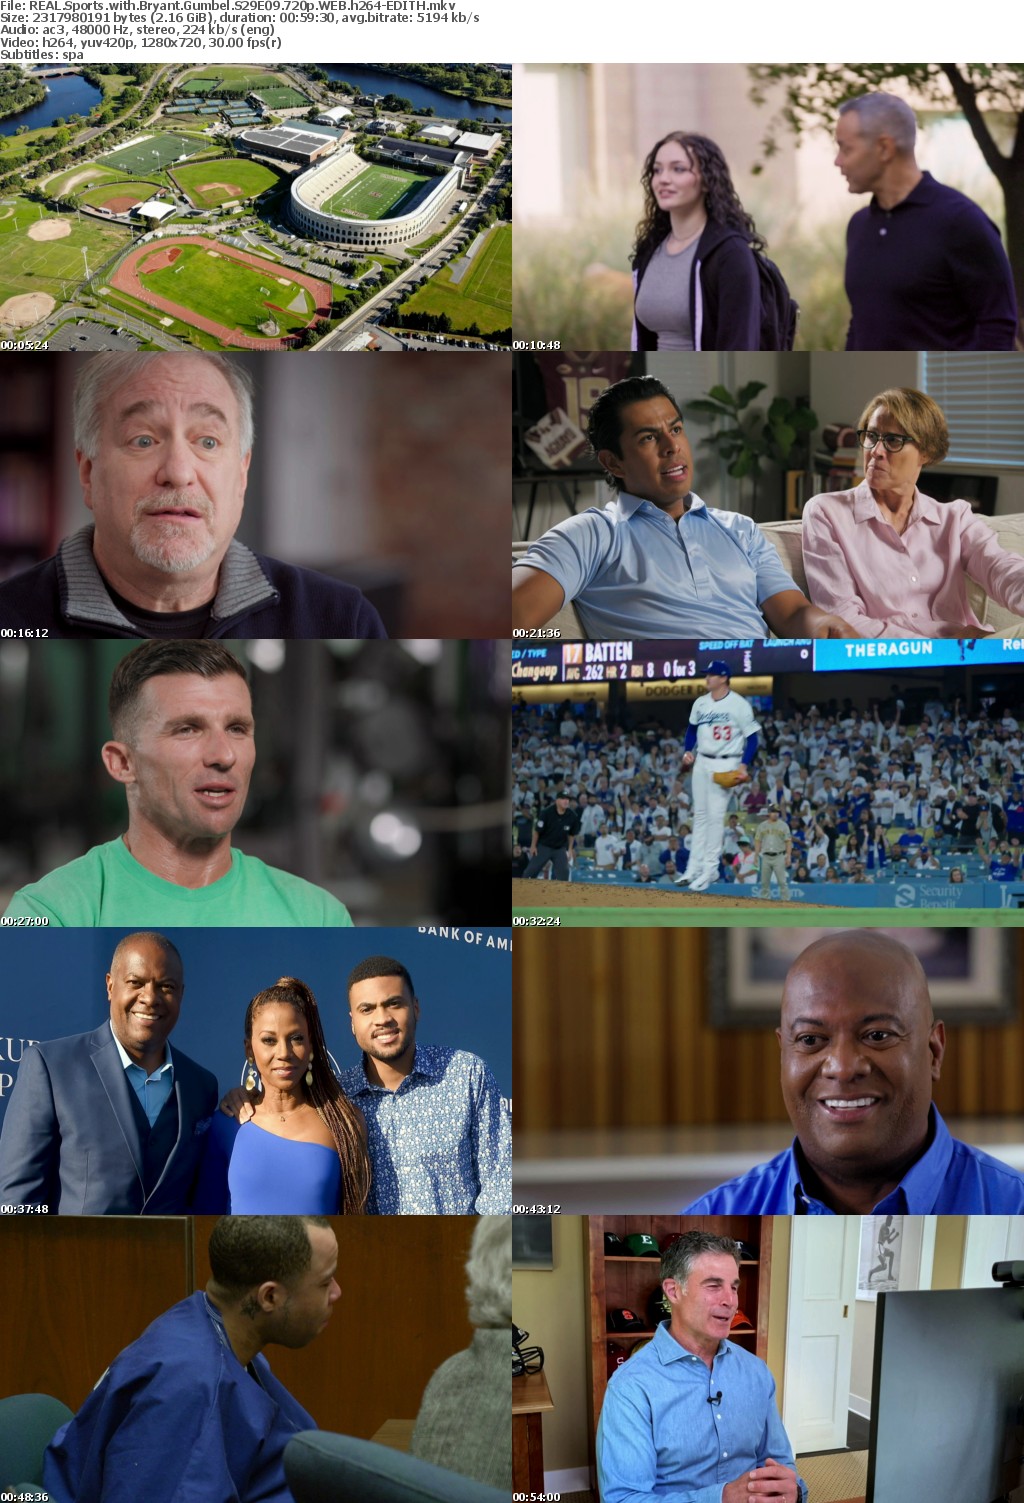 REAL Sports with Bryant Gumbel S29E09 720p WEB h264-EDITH